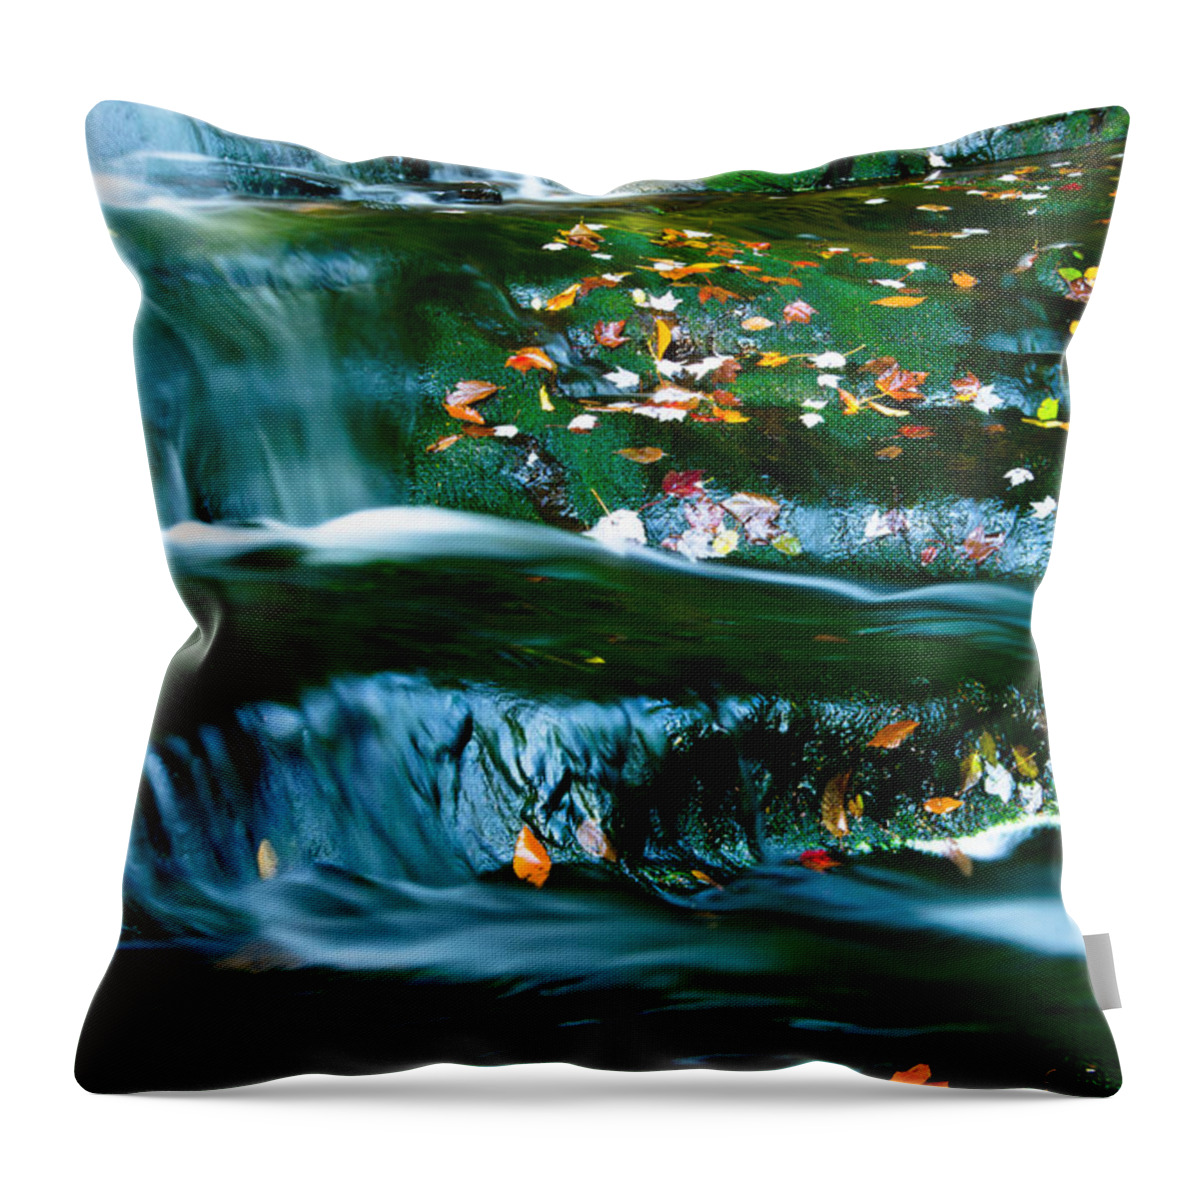 Waterfalls Throw Pillow featuring the photograph Waterfall on Moss by Crystal Wightman